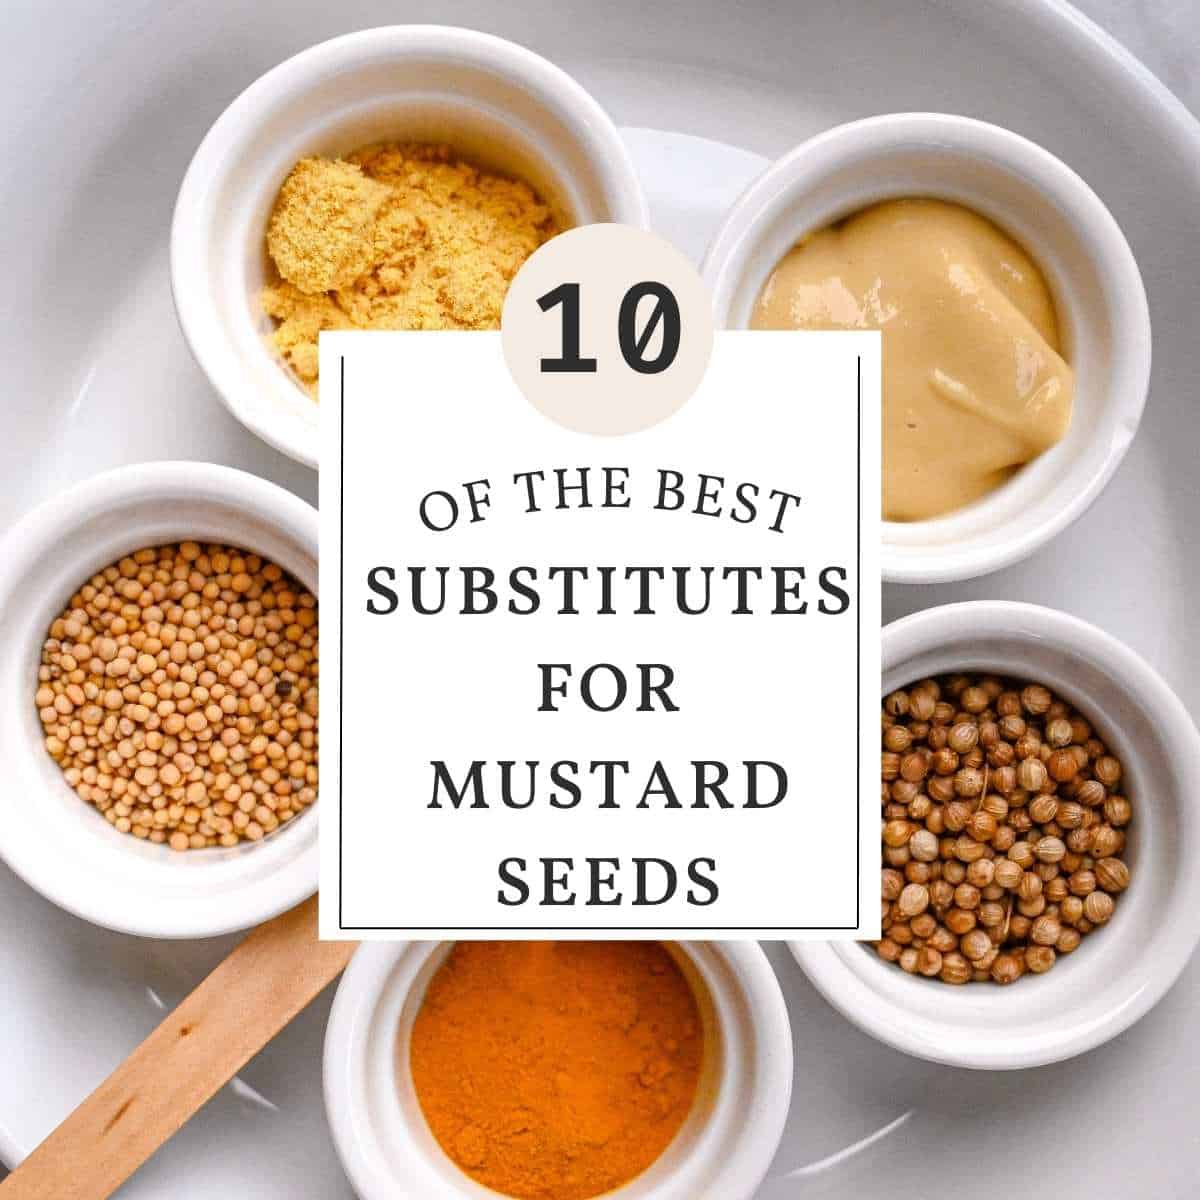 10 of the best substitutes for mustard seeds with image of substitutes